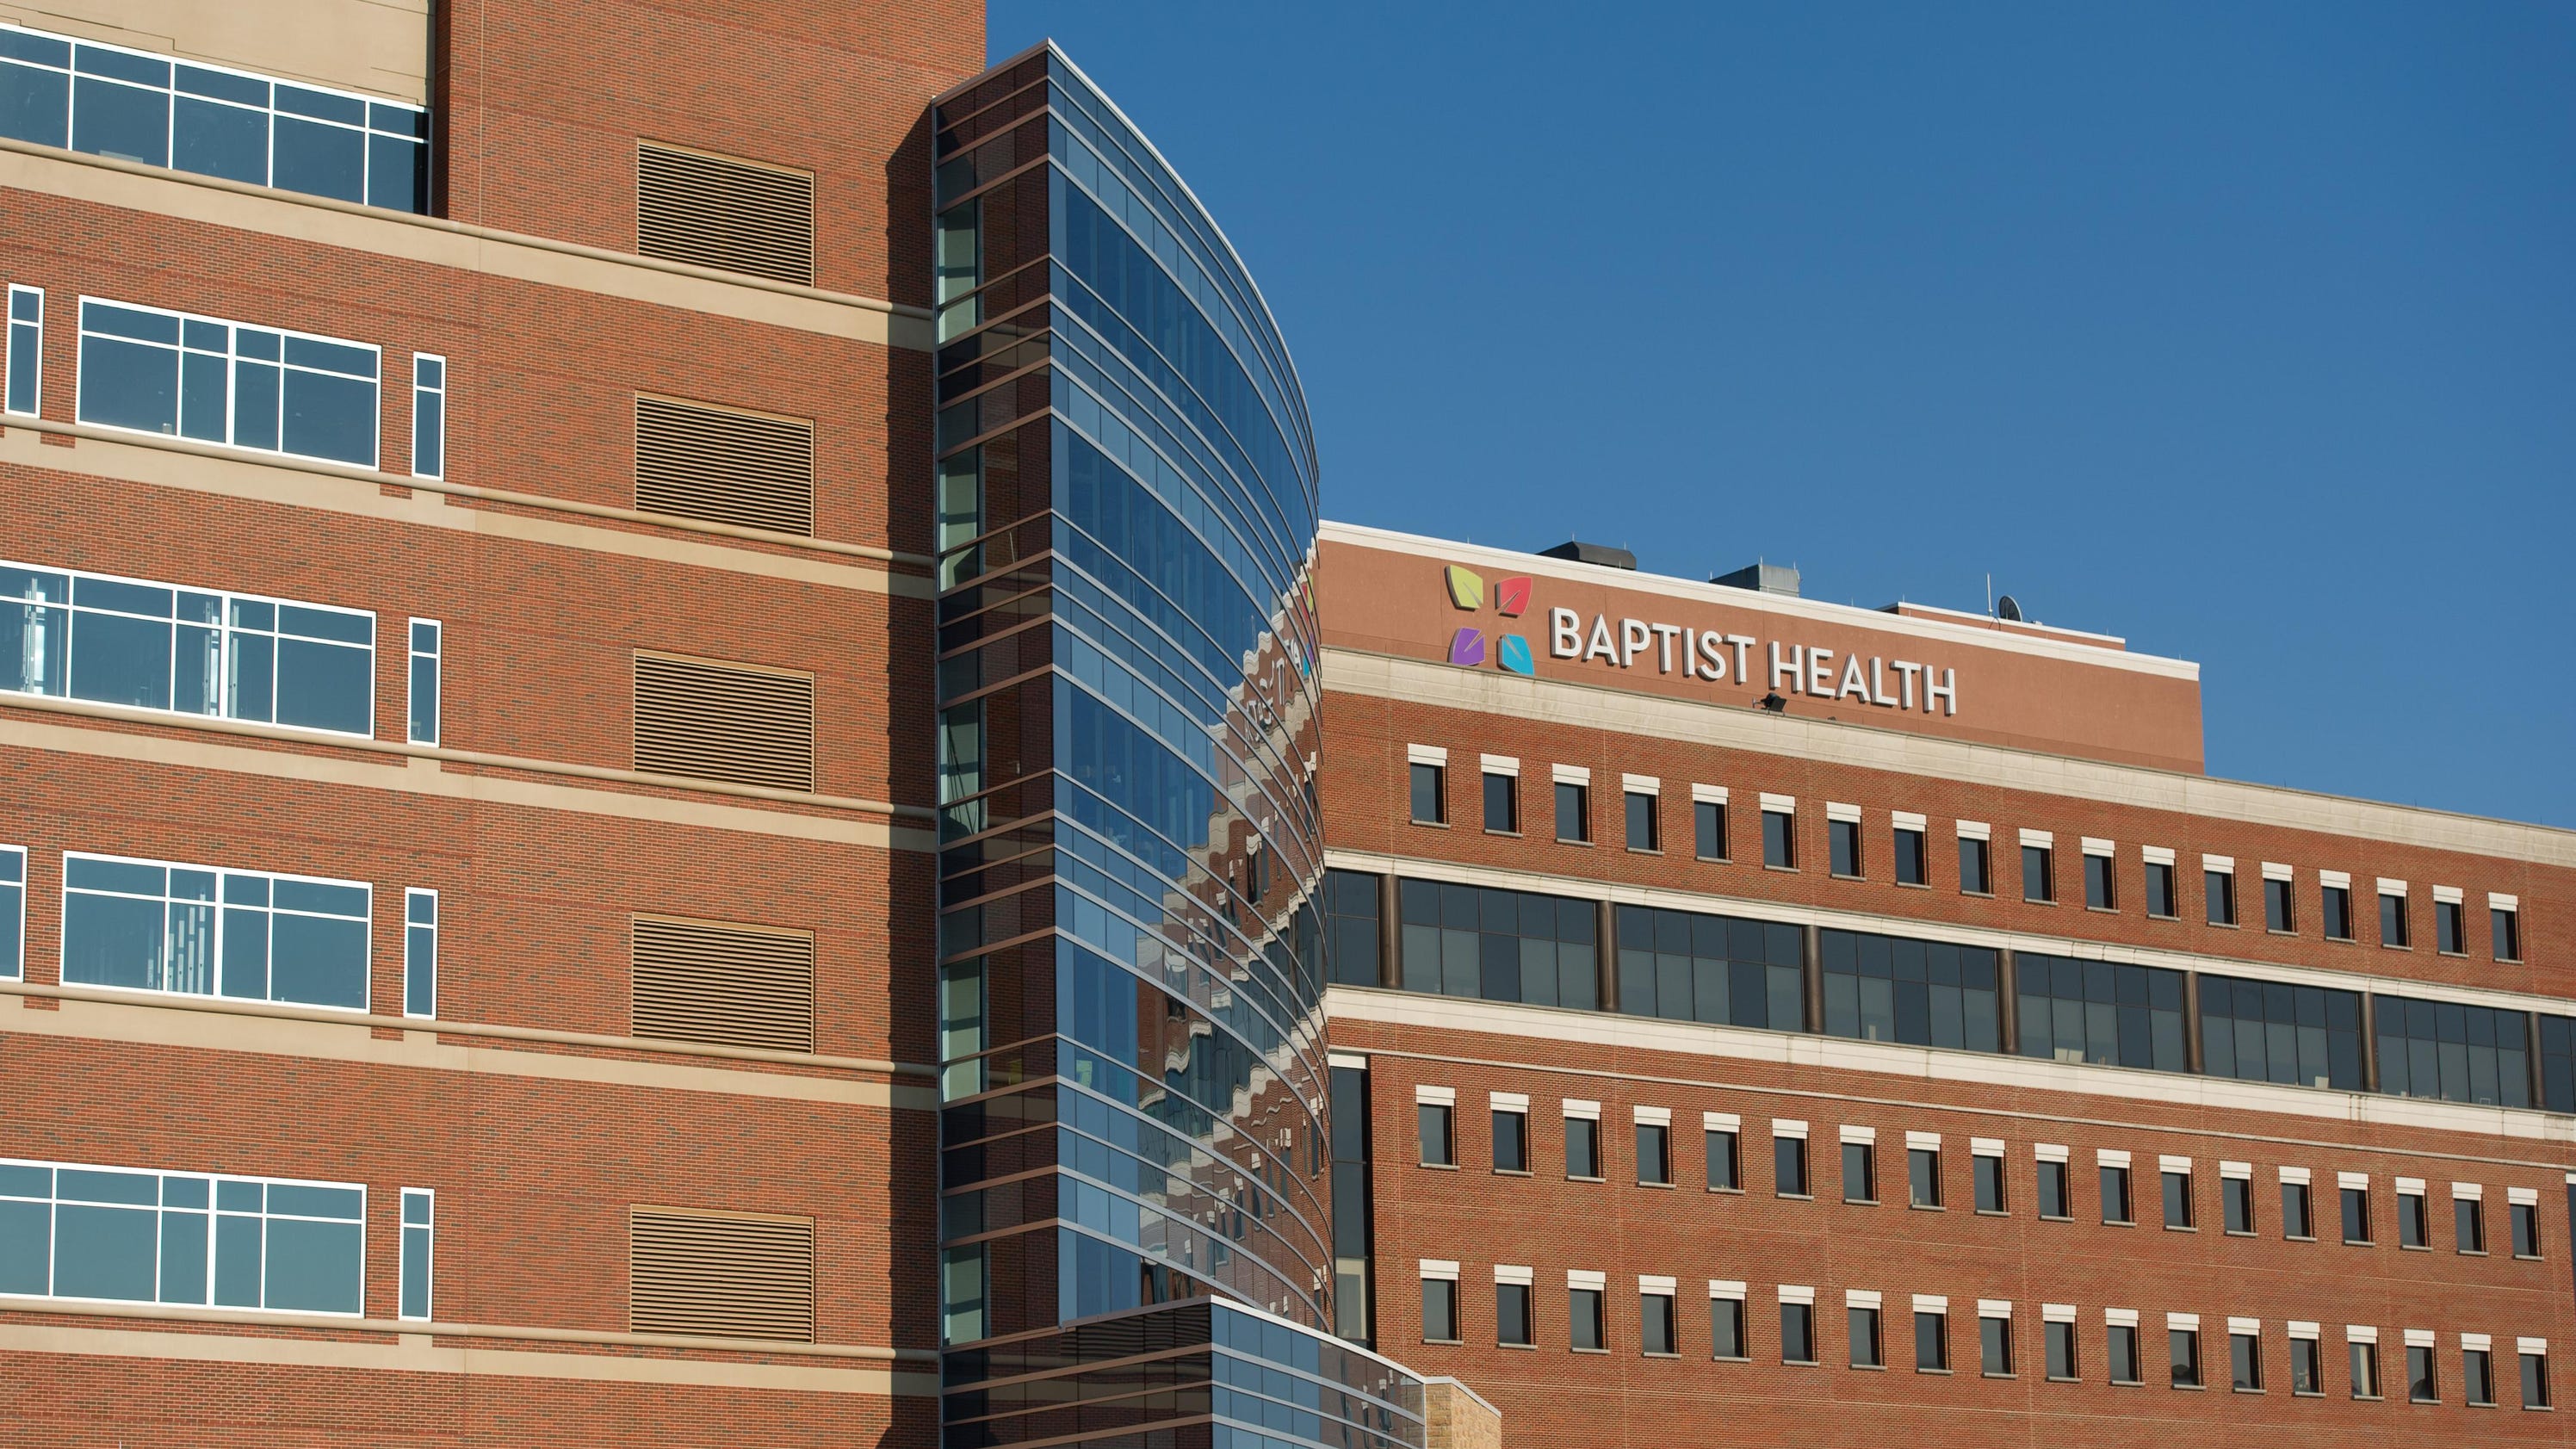 An annual ranking of the nation’s best hospitals has placed Baptist